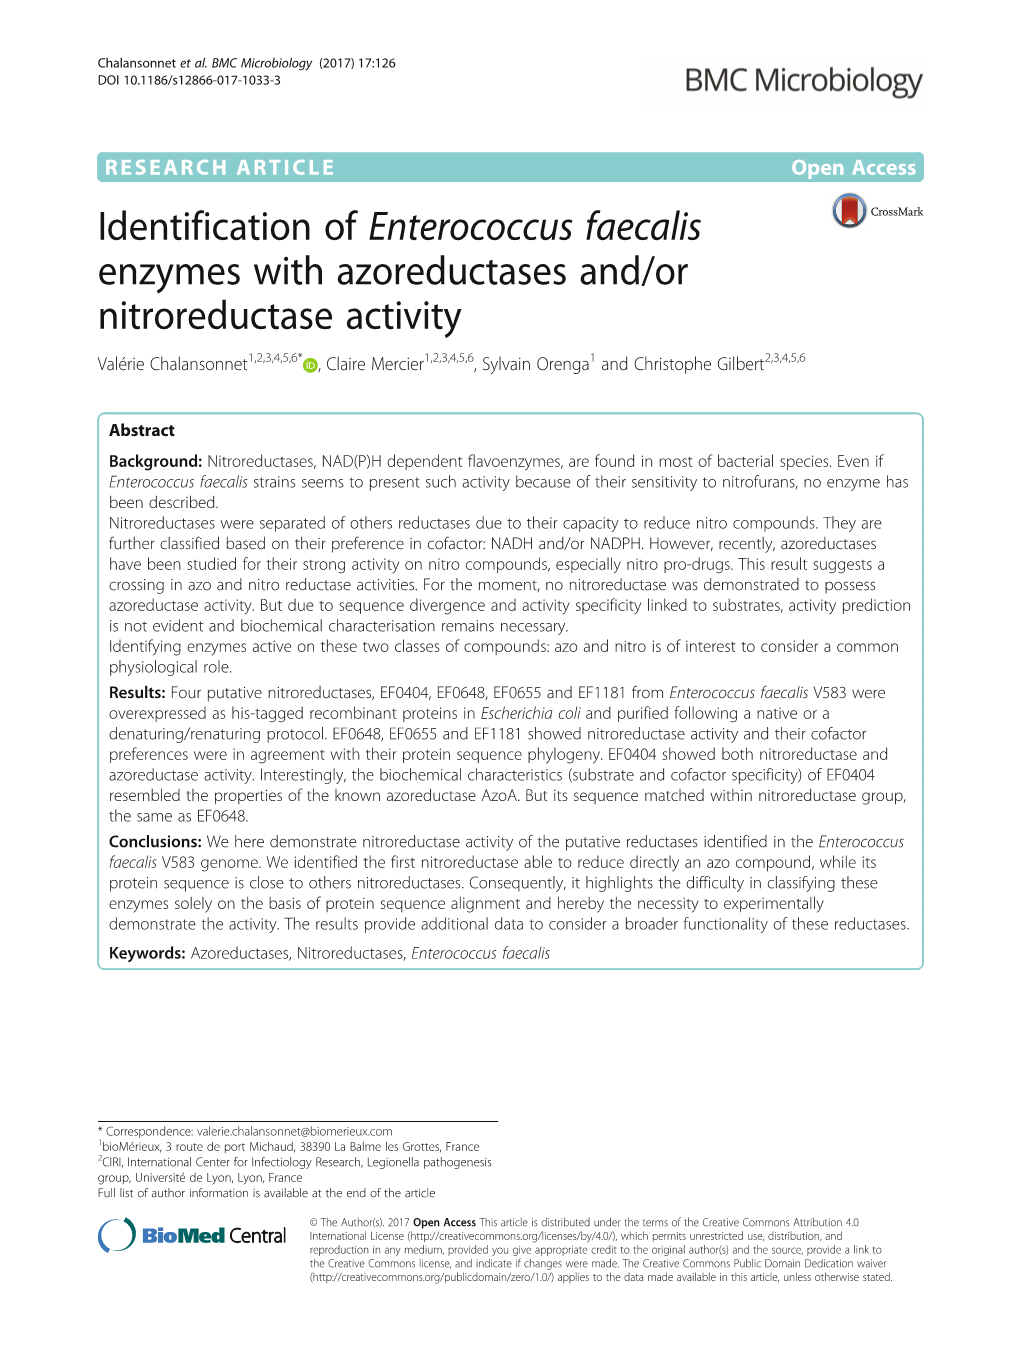 Identification of Enterococcus Faecalis Enzymes with Azoreductases And/Or